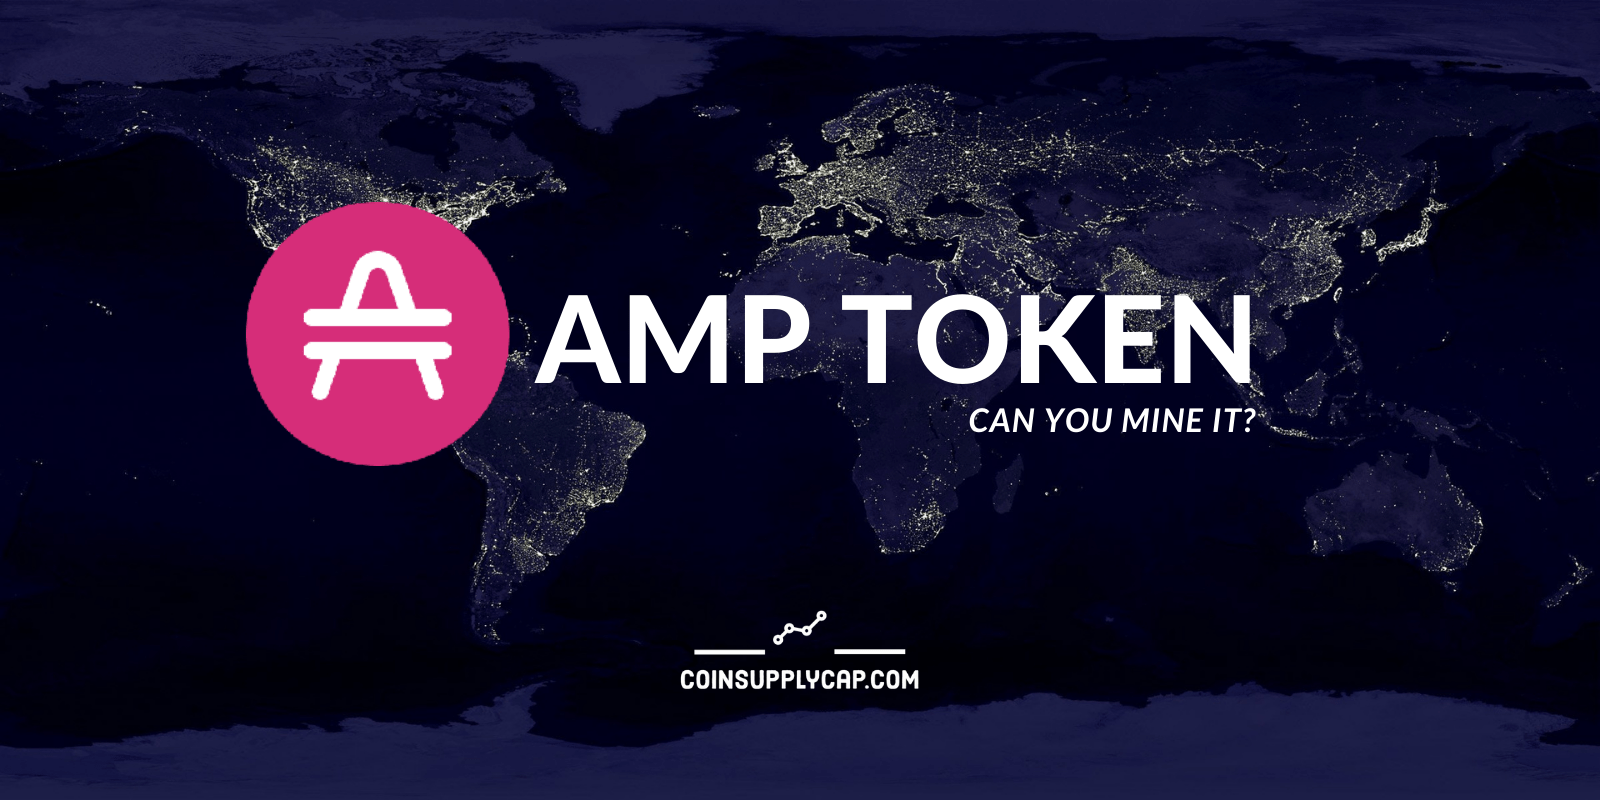 Featured image for “Can AMP be mined?”